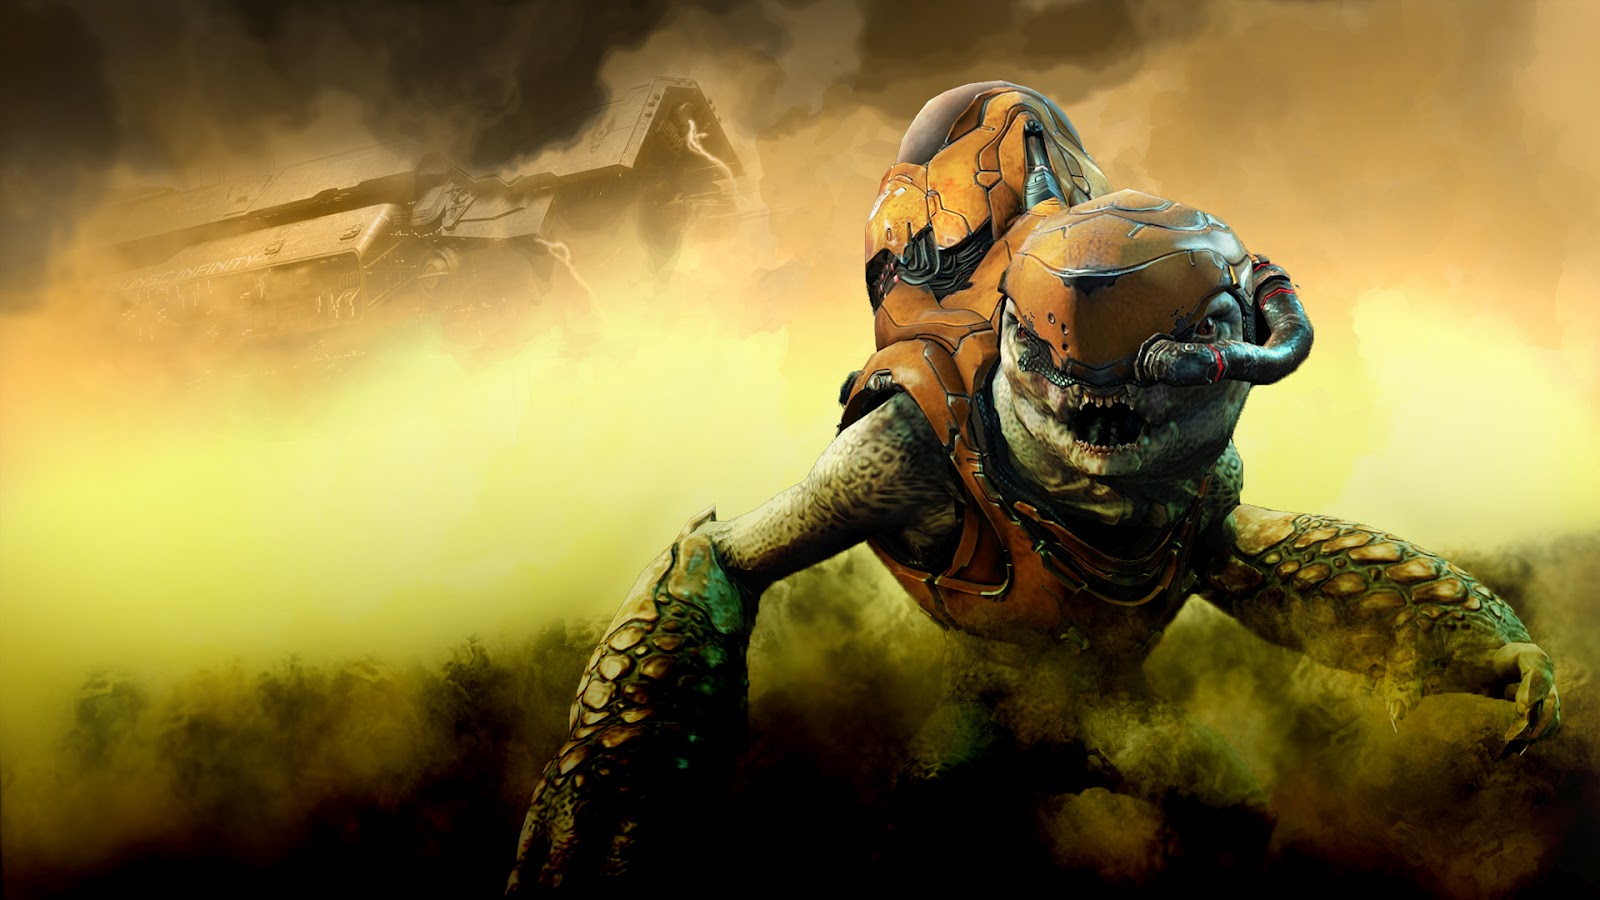 halo wallpapers hd,action adventure game,cg artwork,games,pc game,adventure game